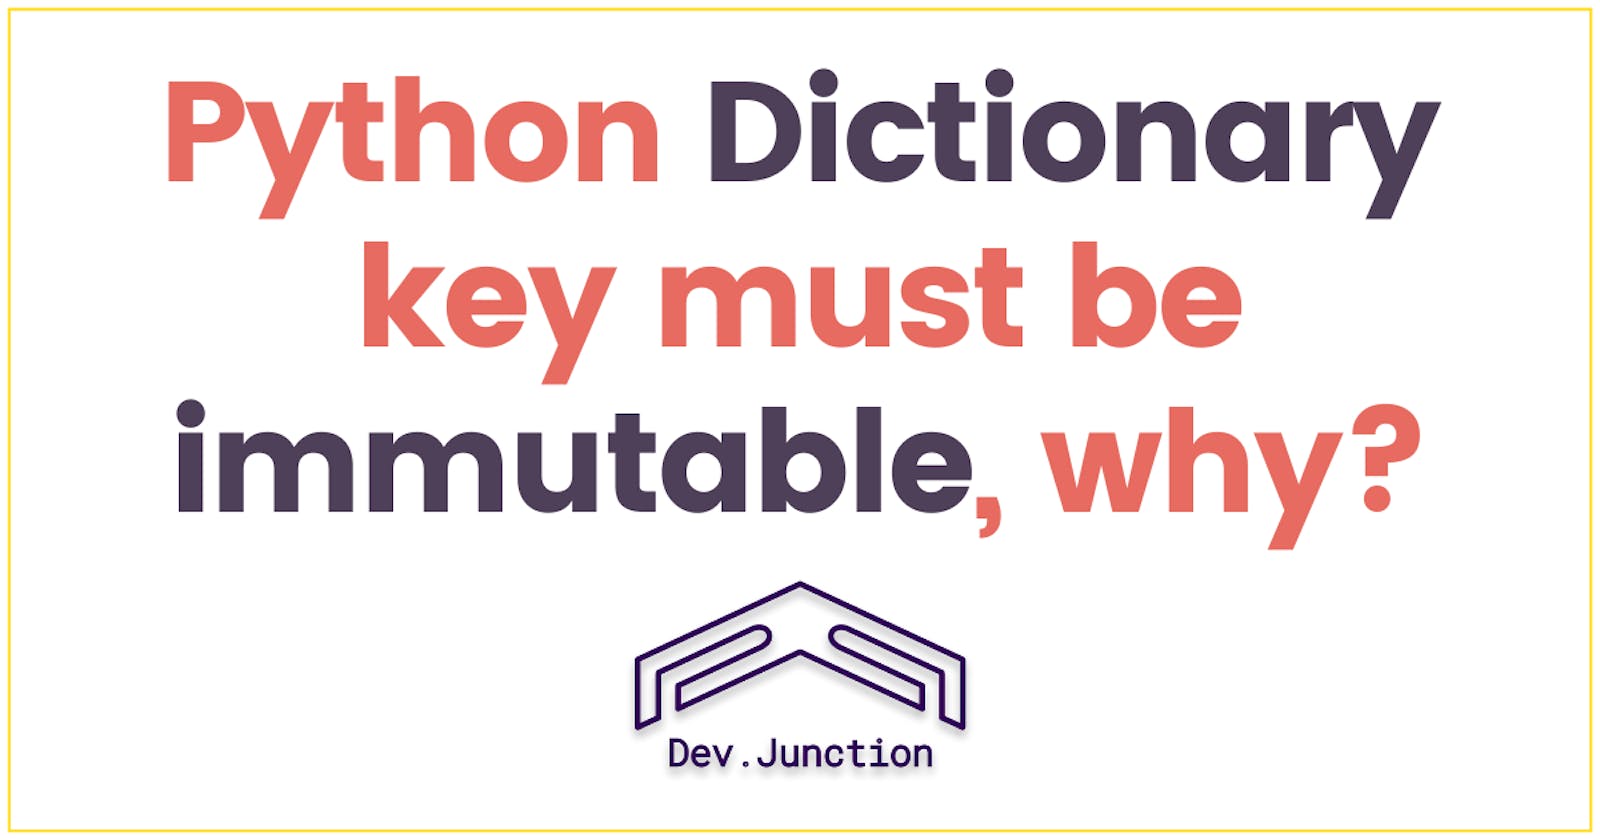 Why must Python dictionary keys be immutable?